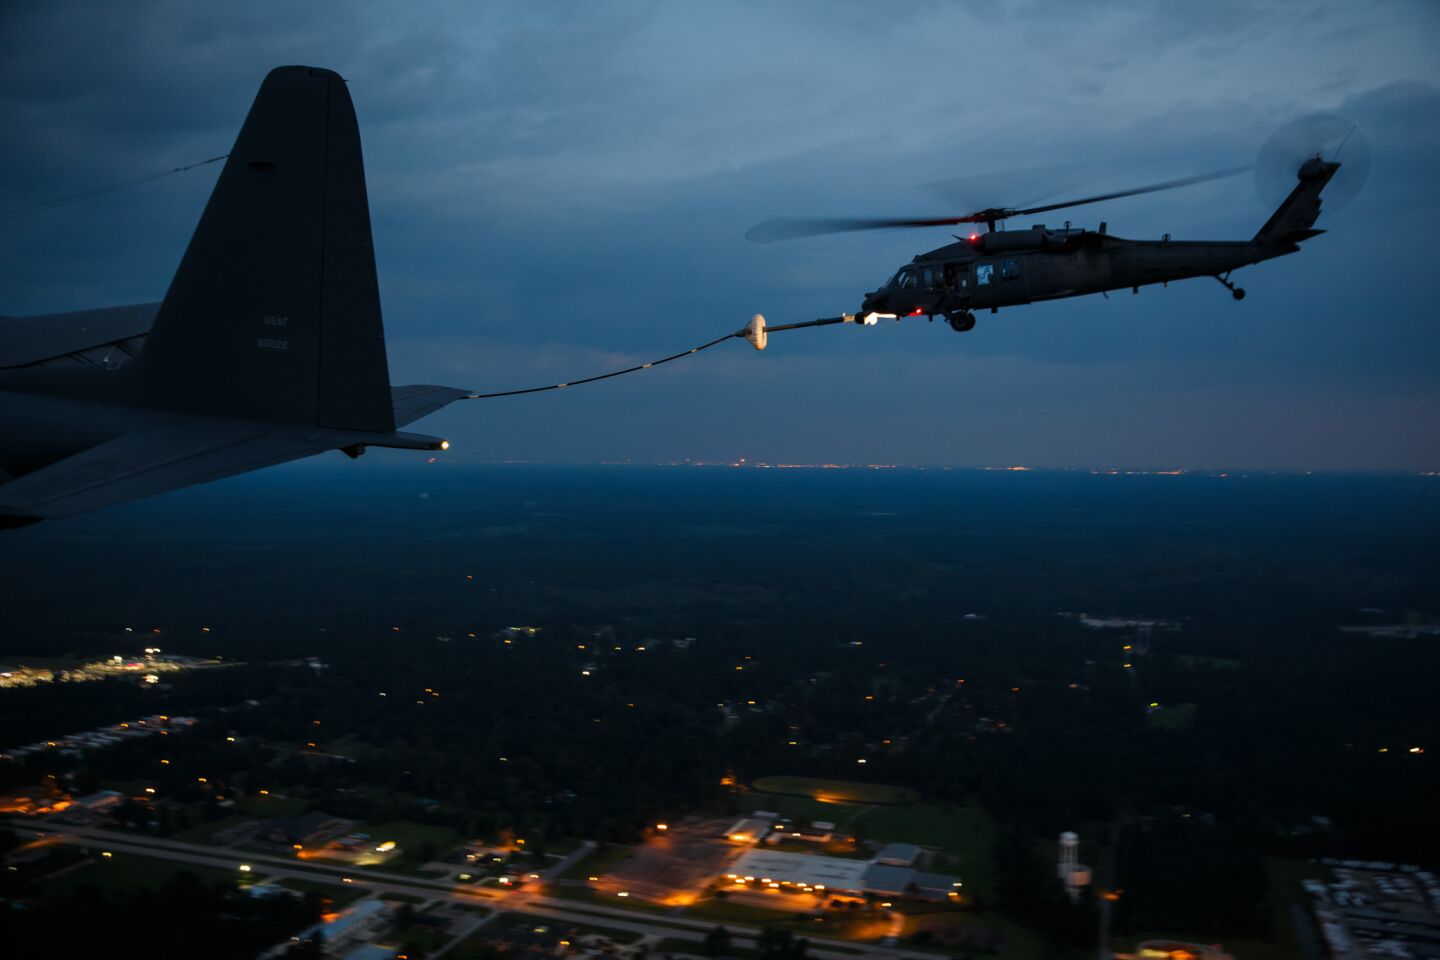 A military search and rescue helicopter refuels mid-flight before resuming nighttime missions over areas flooded in the aftermath of Tropical Storm Harvey.